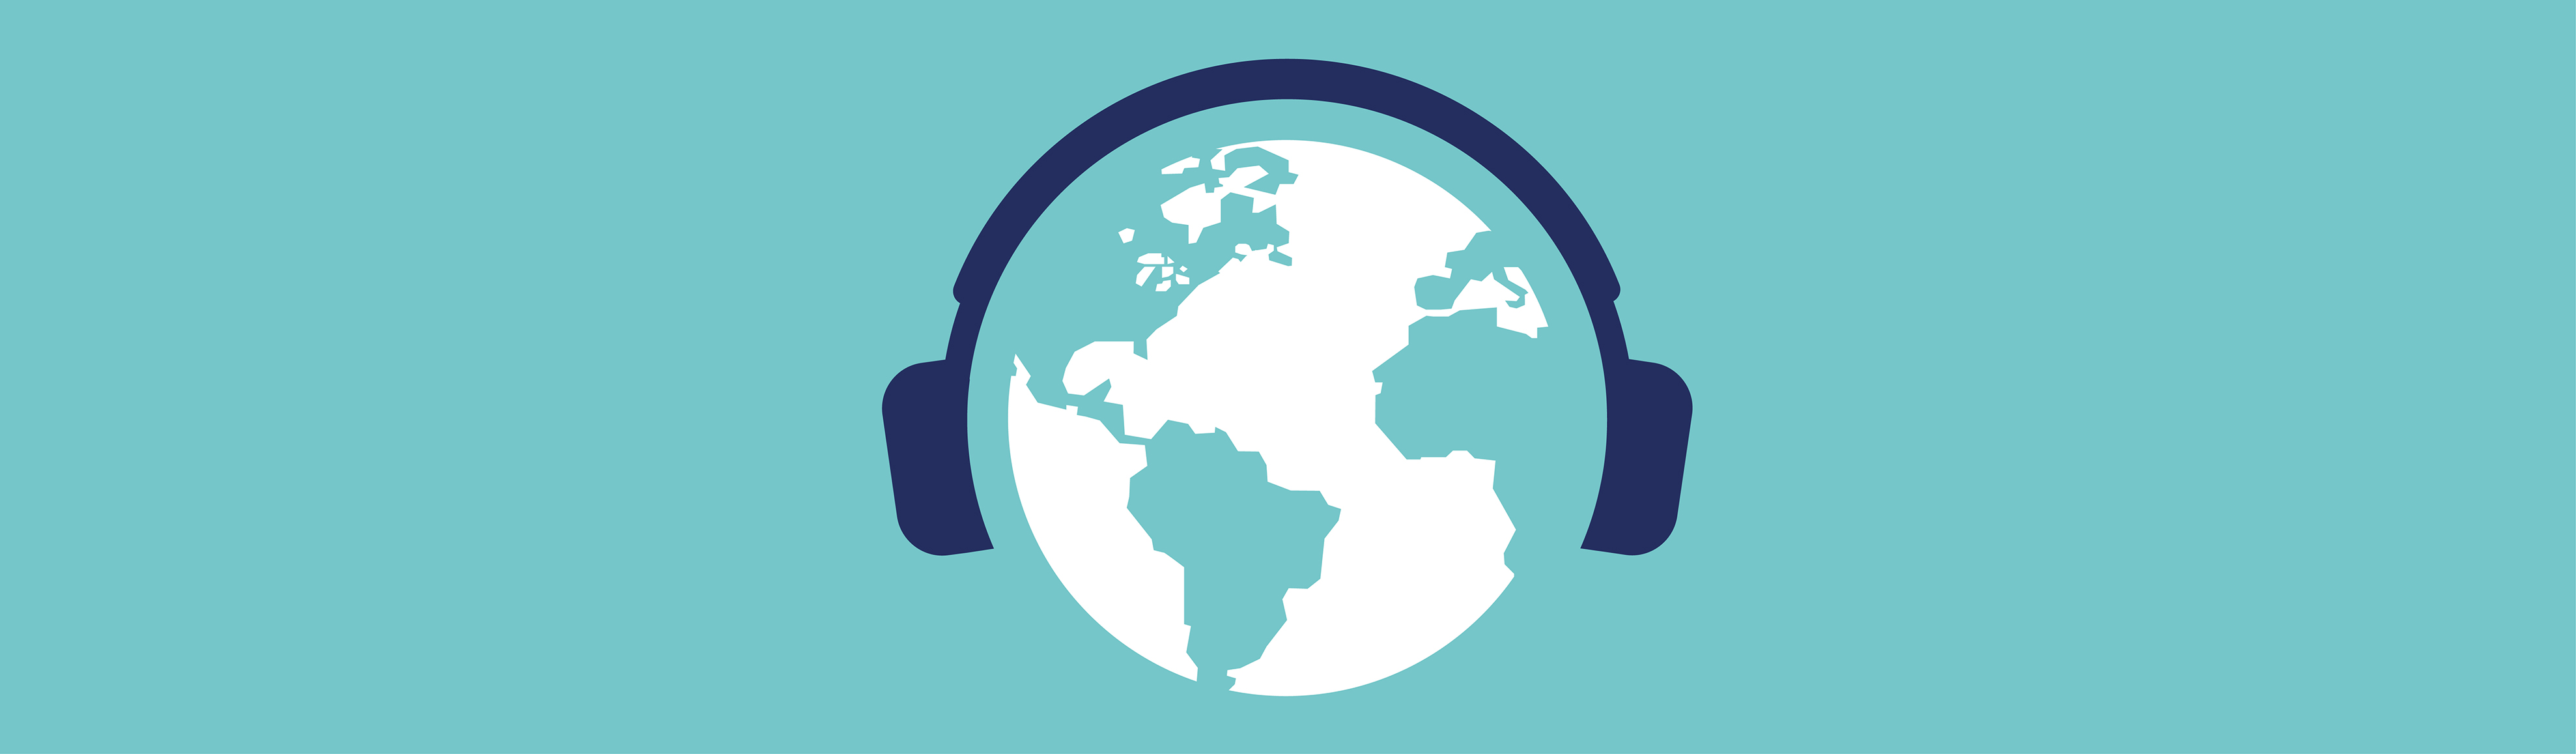 Graphic of a globe wearing headphones on a turquoise background